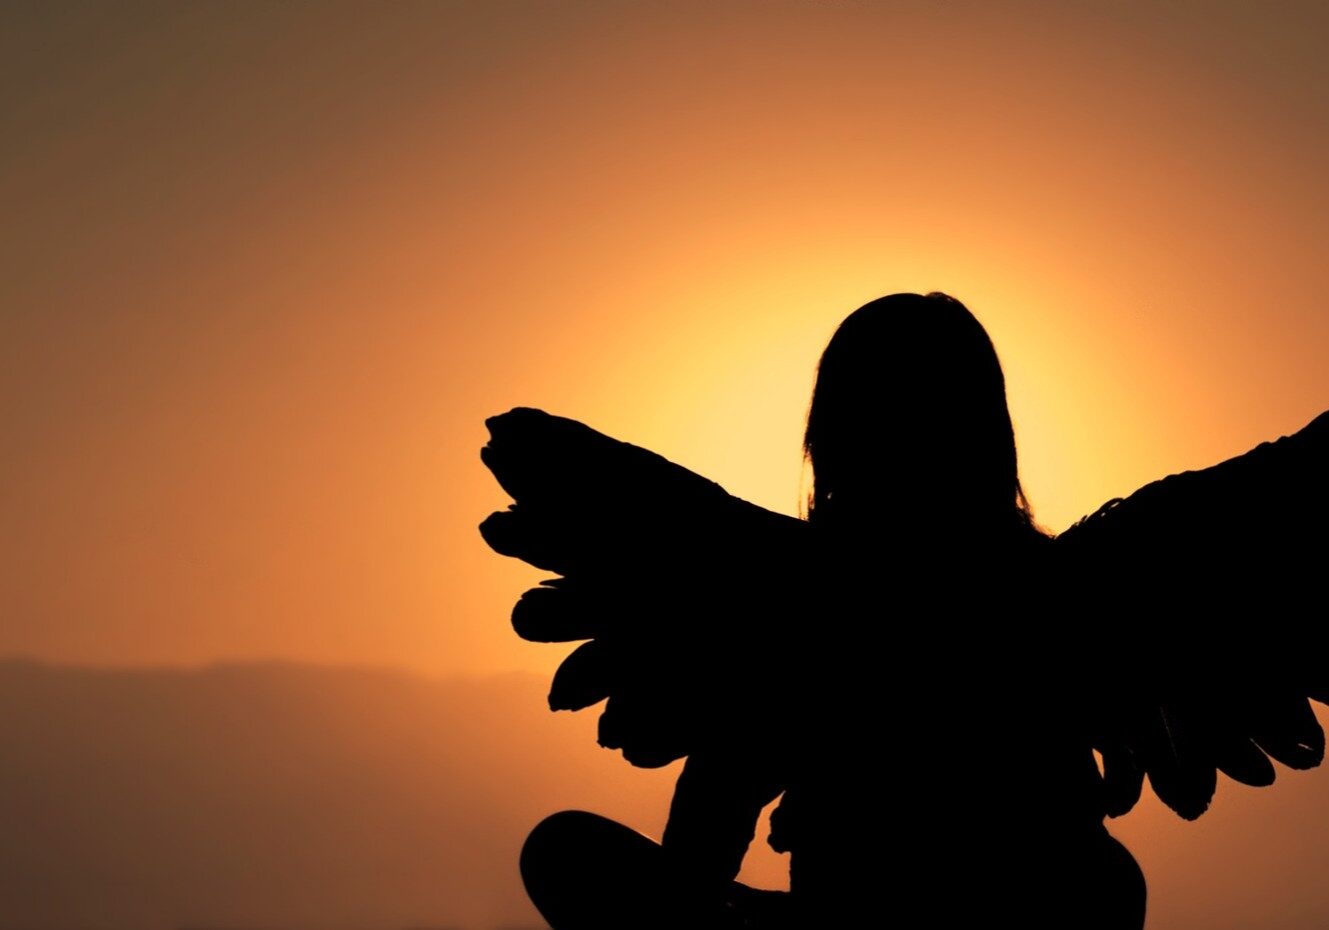 A person with wings sitting in front of the sun.